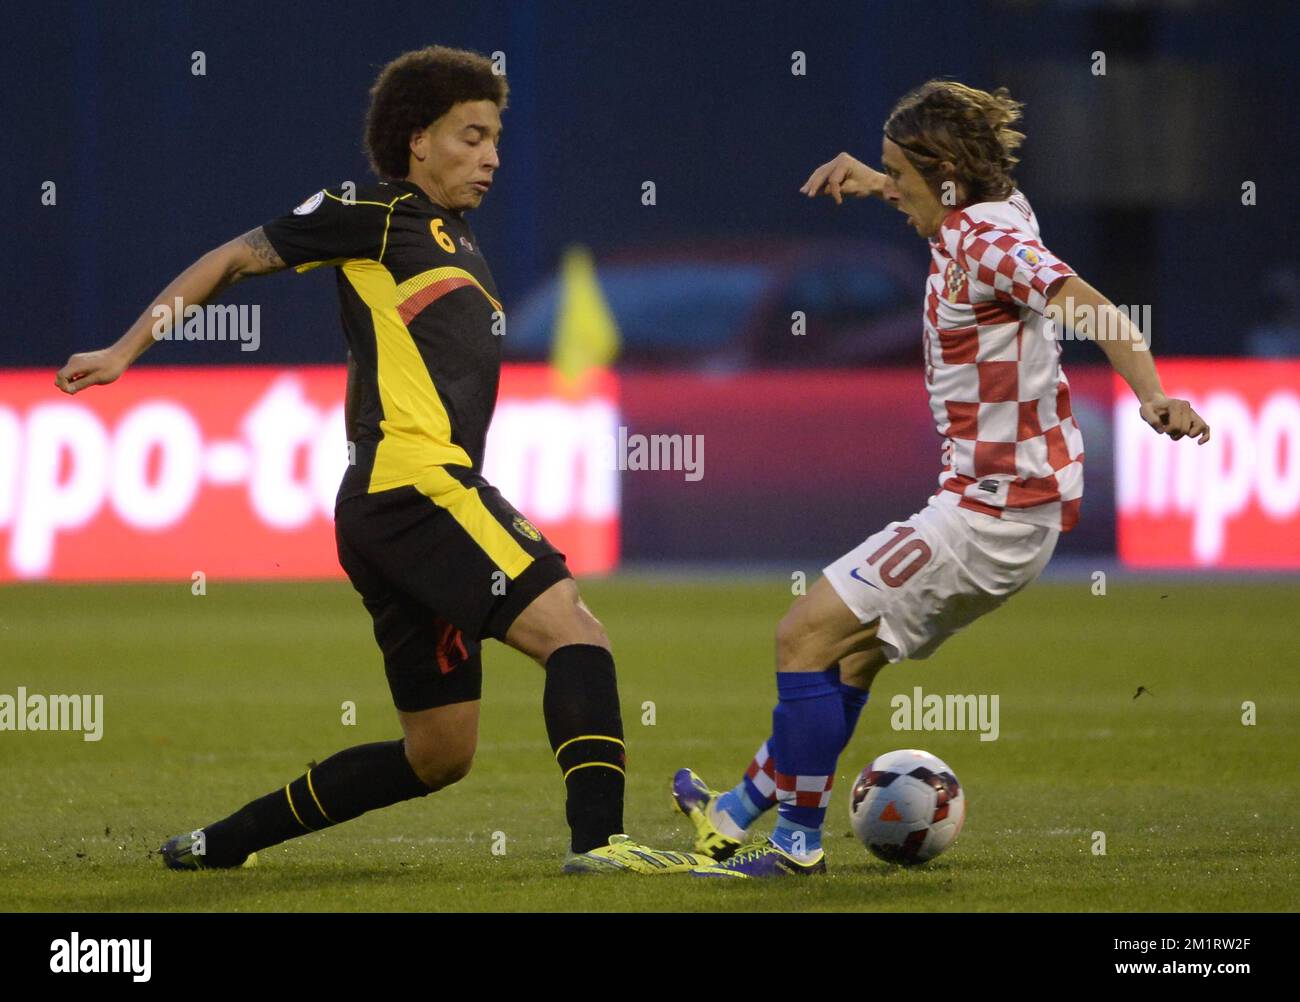 20131011 - ZAGREB, CROATIA: Belgium's Axel Witsel and Croatia's Luka Modric fight for the ball during a soccer game between Belgian national team The Red Devils and the Croatian national team in the Maksimir stadium in Zagreb, Croatia, Friday 11 October 2013, a qualification game for the 2014 FIFA World Cup. With two games to play the Red Devils are leading group A, they need one more point to qualify for the World Cup as group winner.   BELGA PHOTO DIRK WAEM Stock Photo